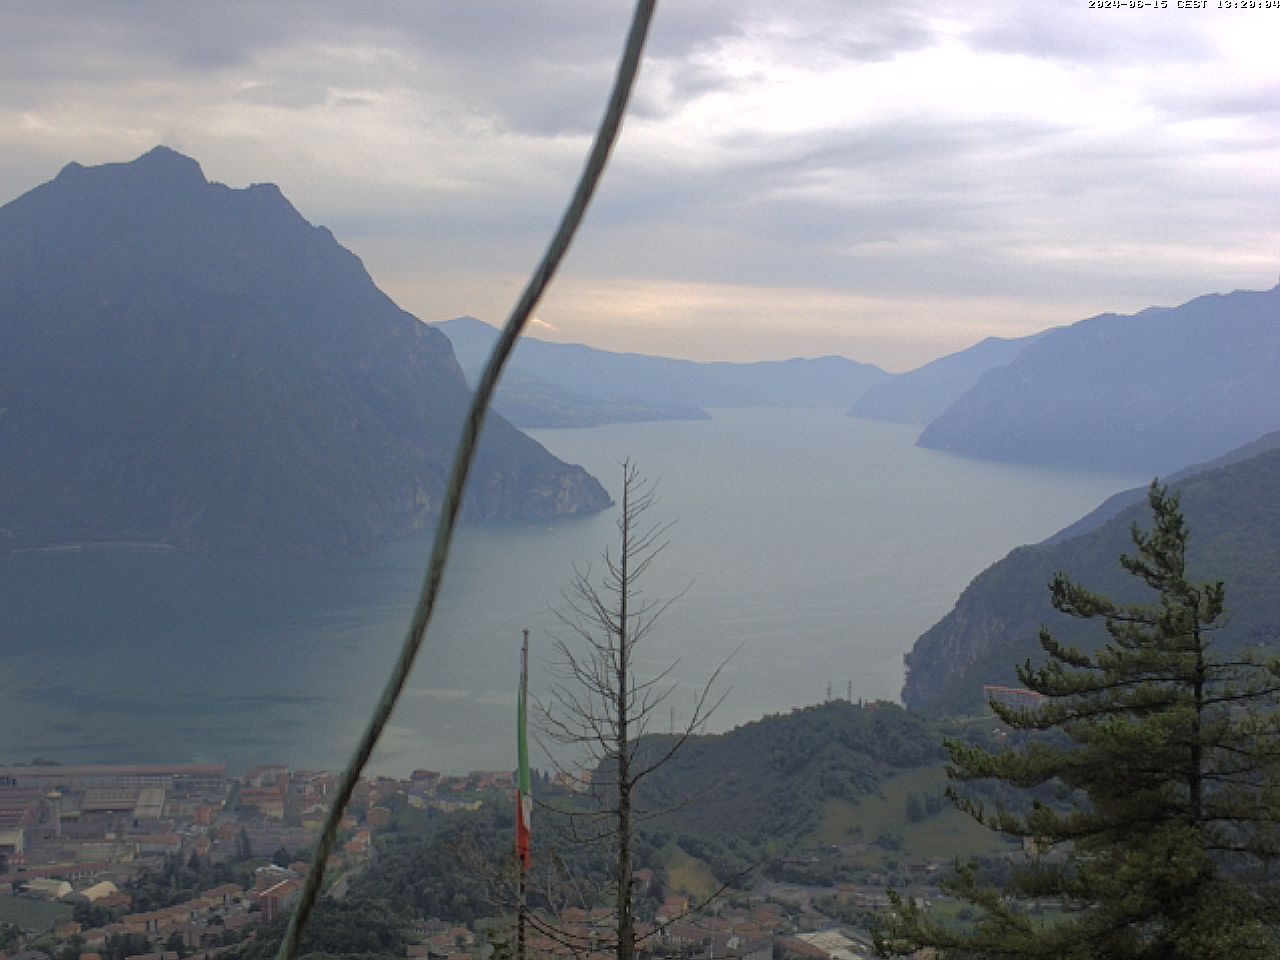 Lovere (Lac d'Iseo) Ma. 13:29